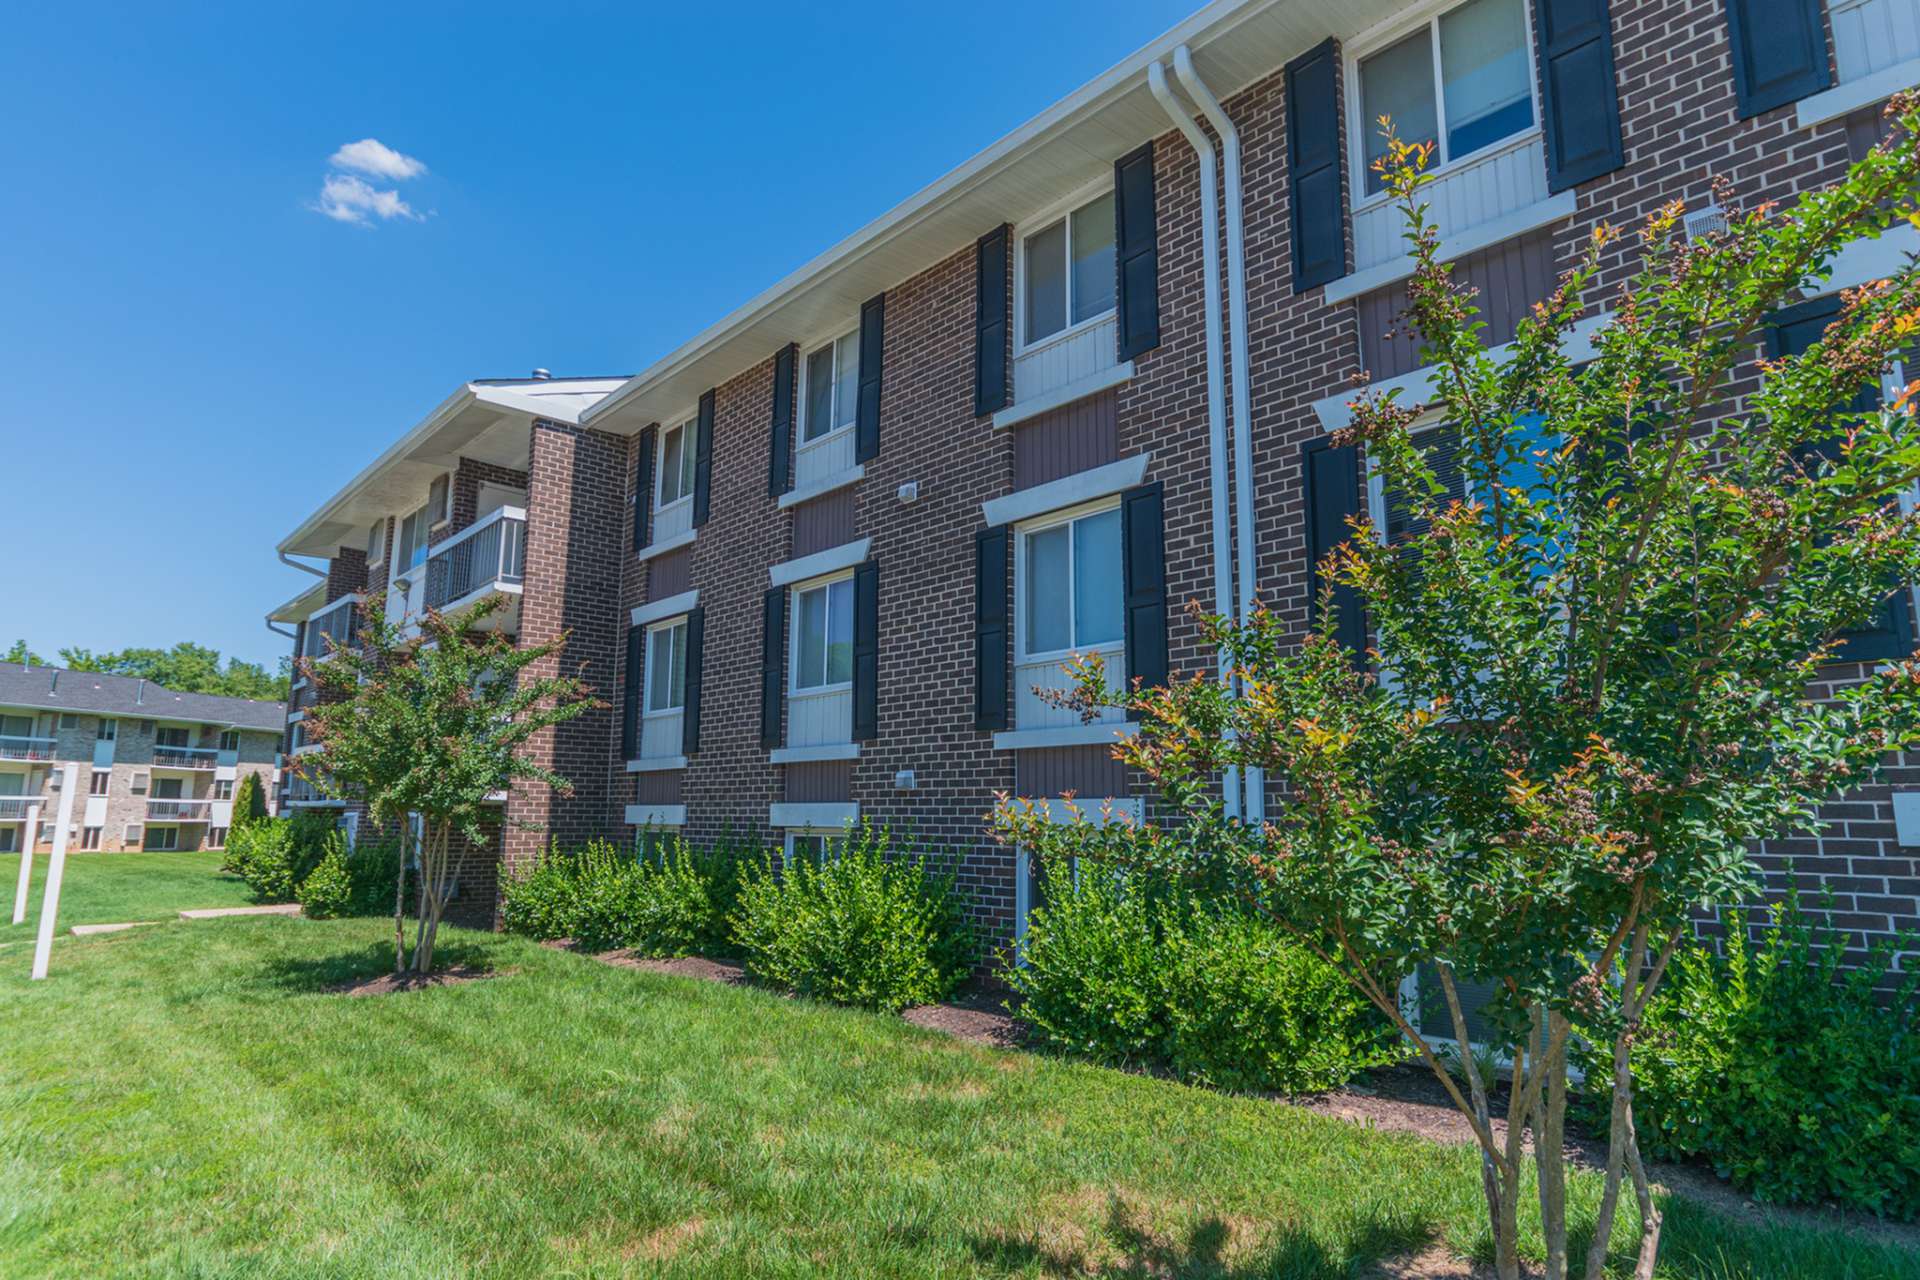 Exterior of an apartment building at Chesapeake Village apartments, fitted with paved walkway, and a lawn